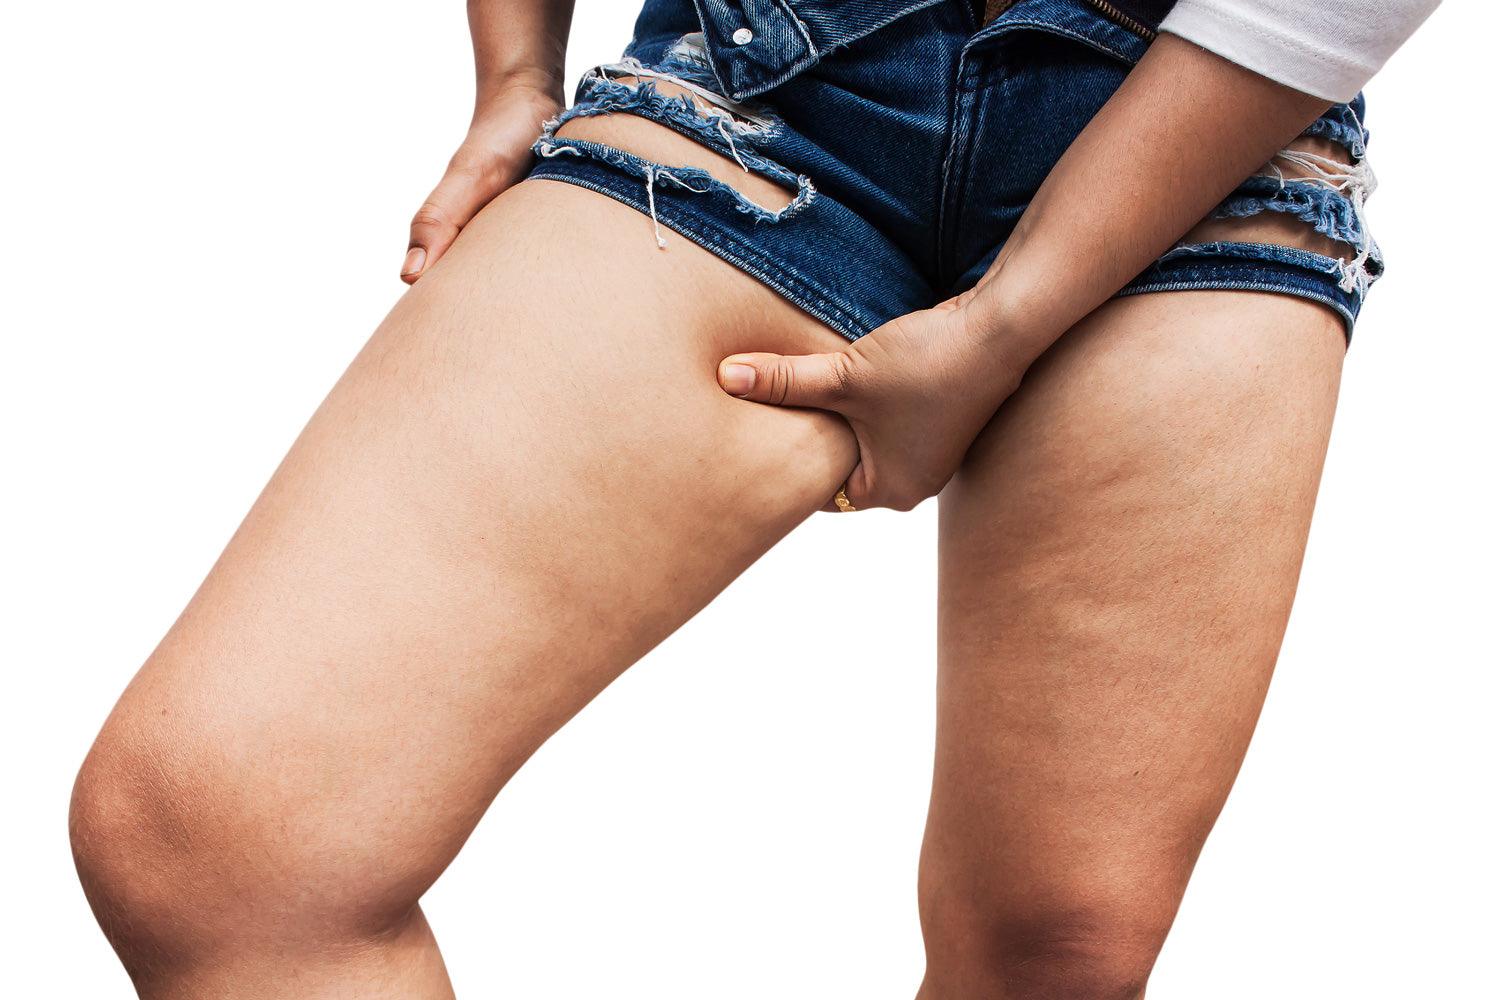 How to prevent thigh chafing